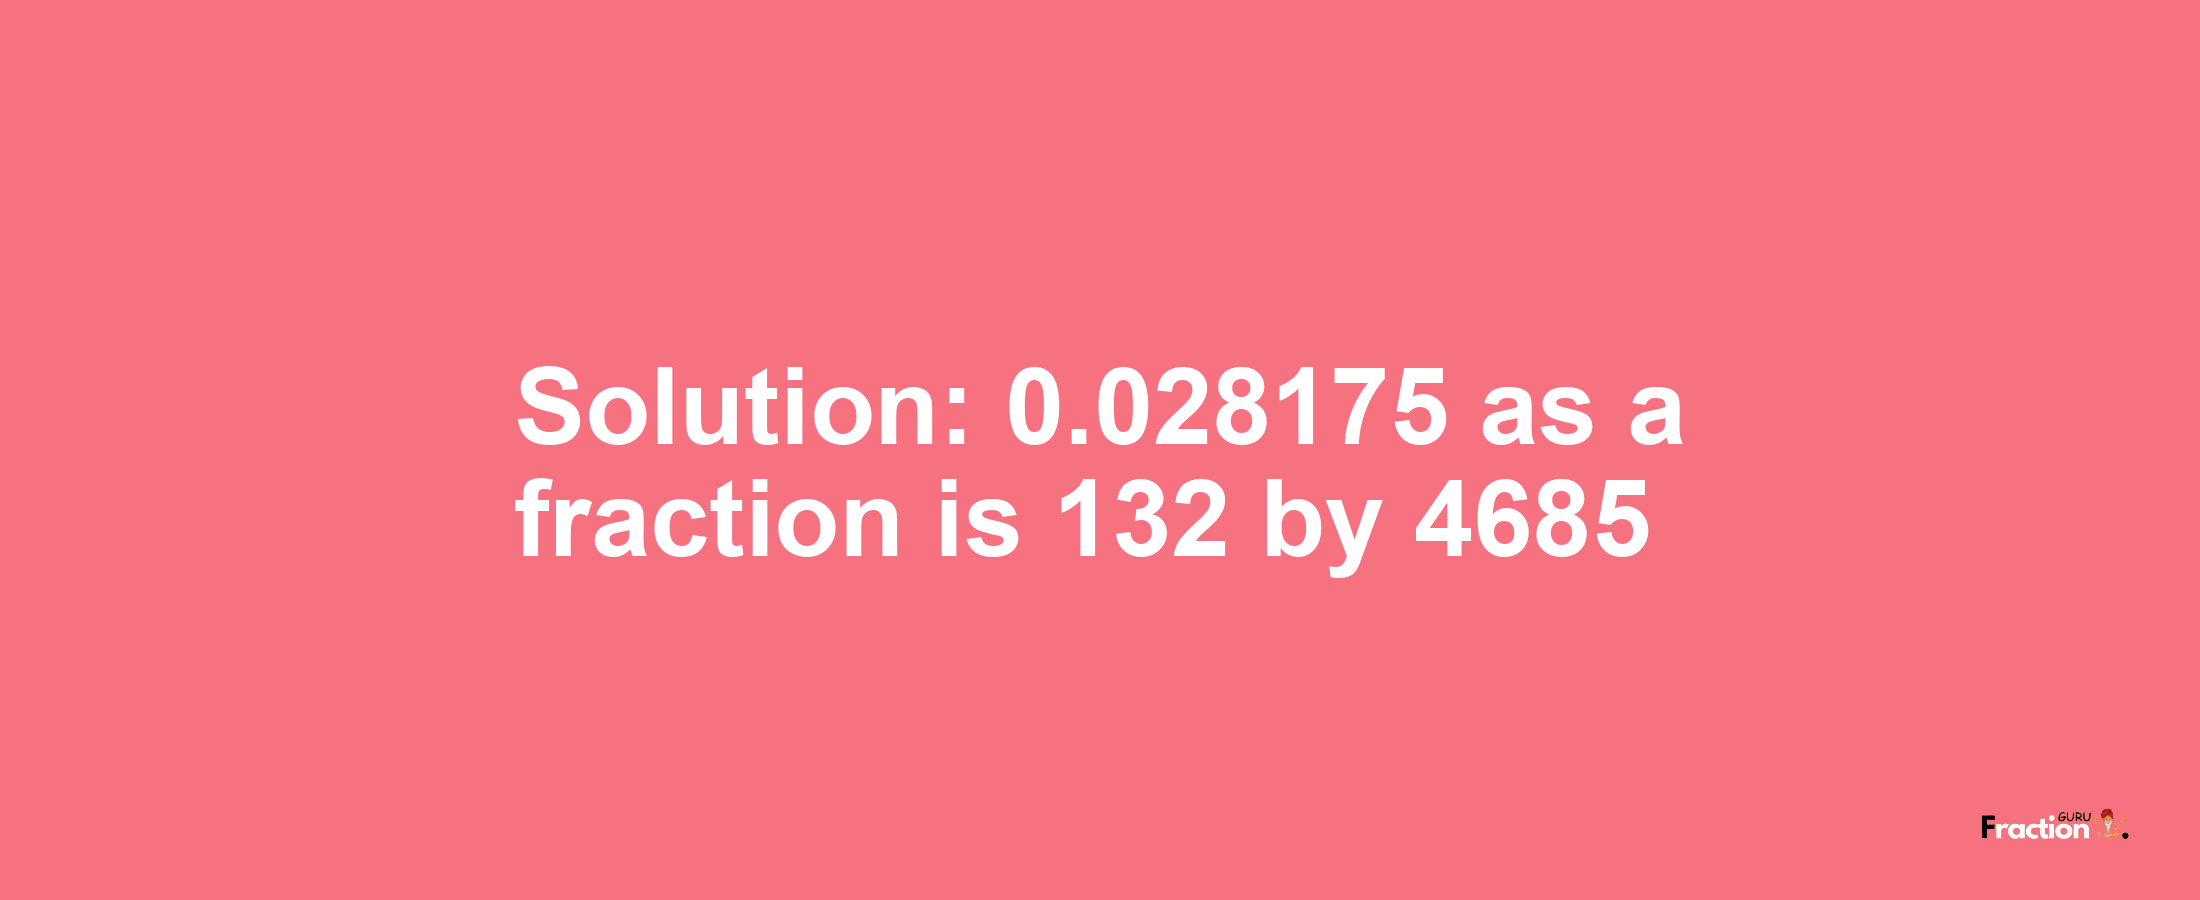 Solution:0.028175 as a fraction is 132/4685